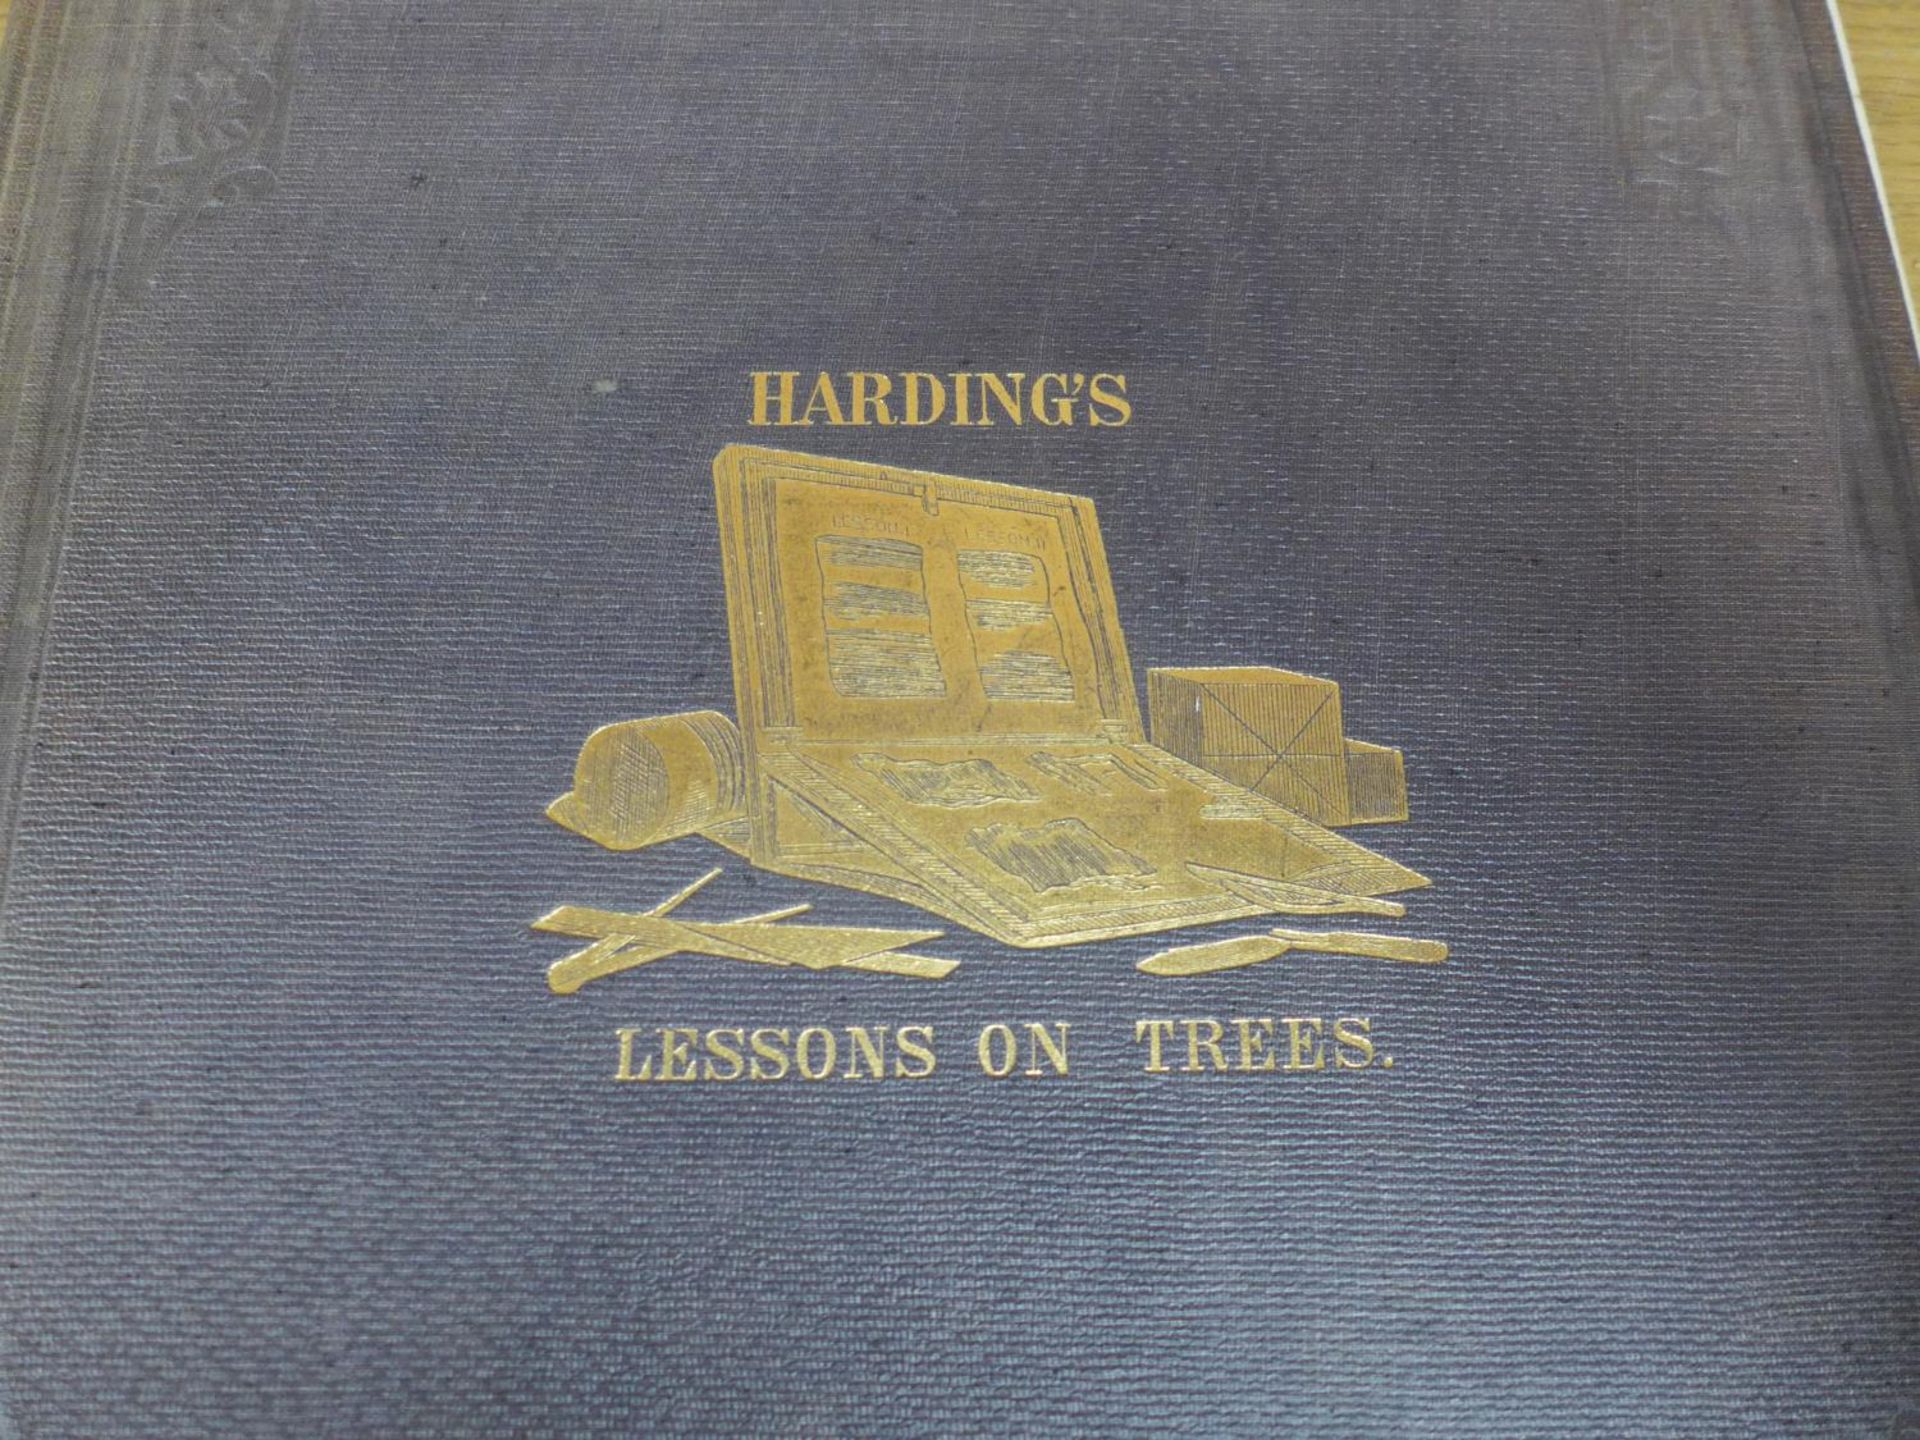 J.D. HARDING 'LESSONS ON TREES' PUBLISHED BY W. KENT & CO, LONDON CIRCA 1879